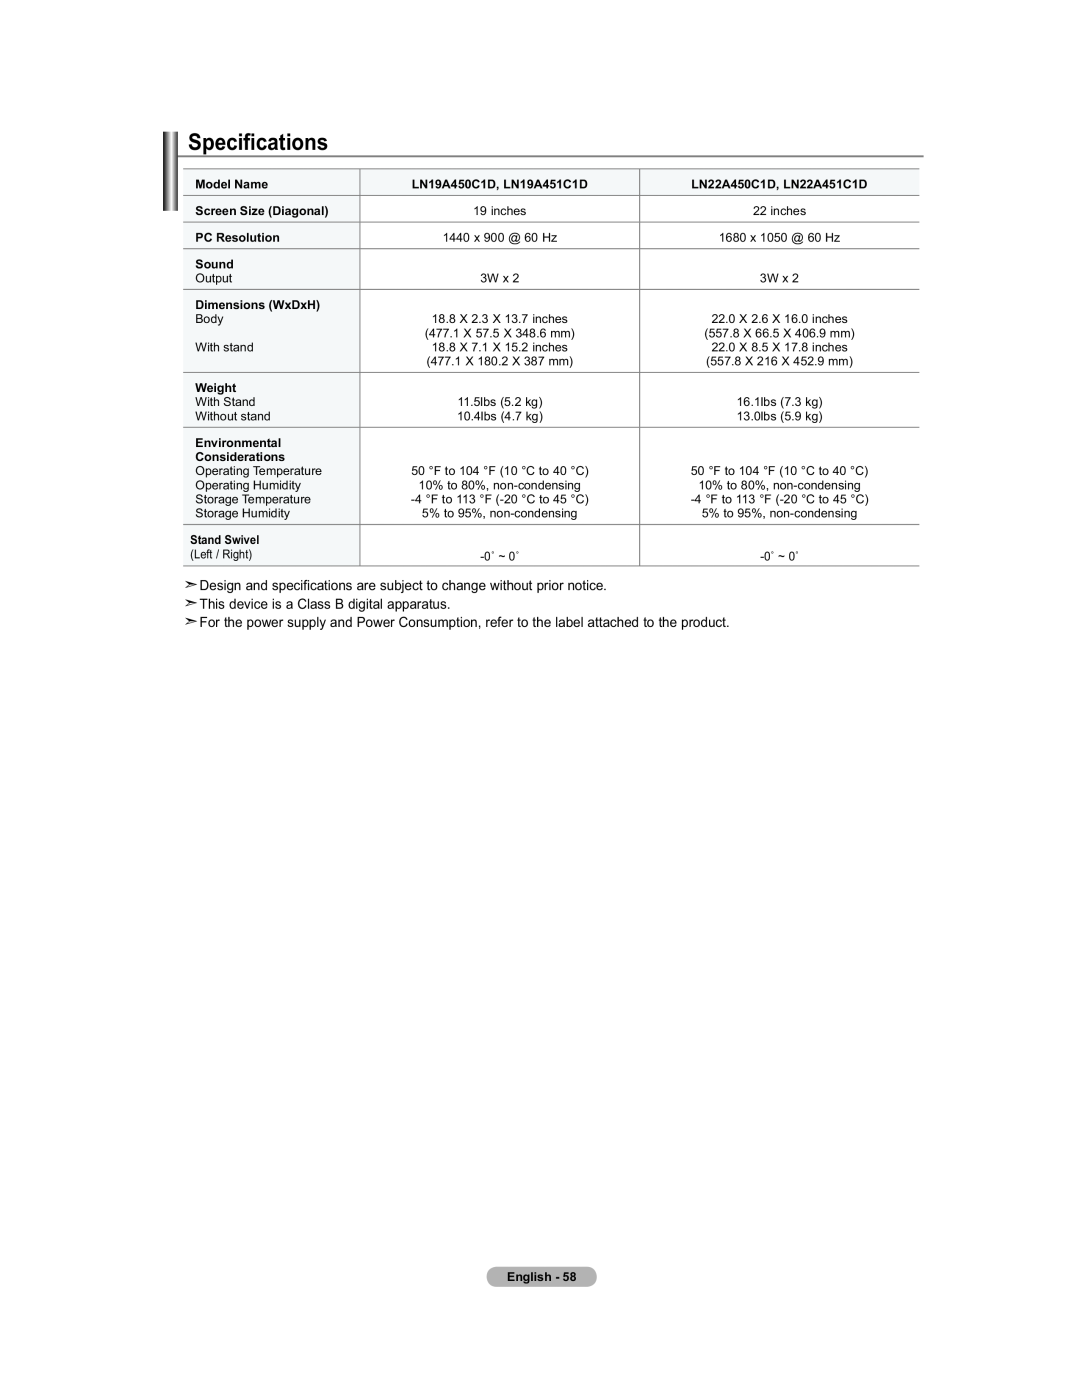 Samsung 451 user manual Speci, Design and specifications are subject to change without prior notice 